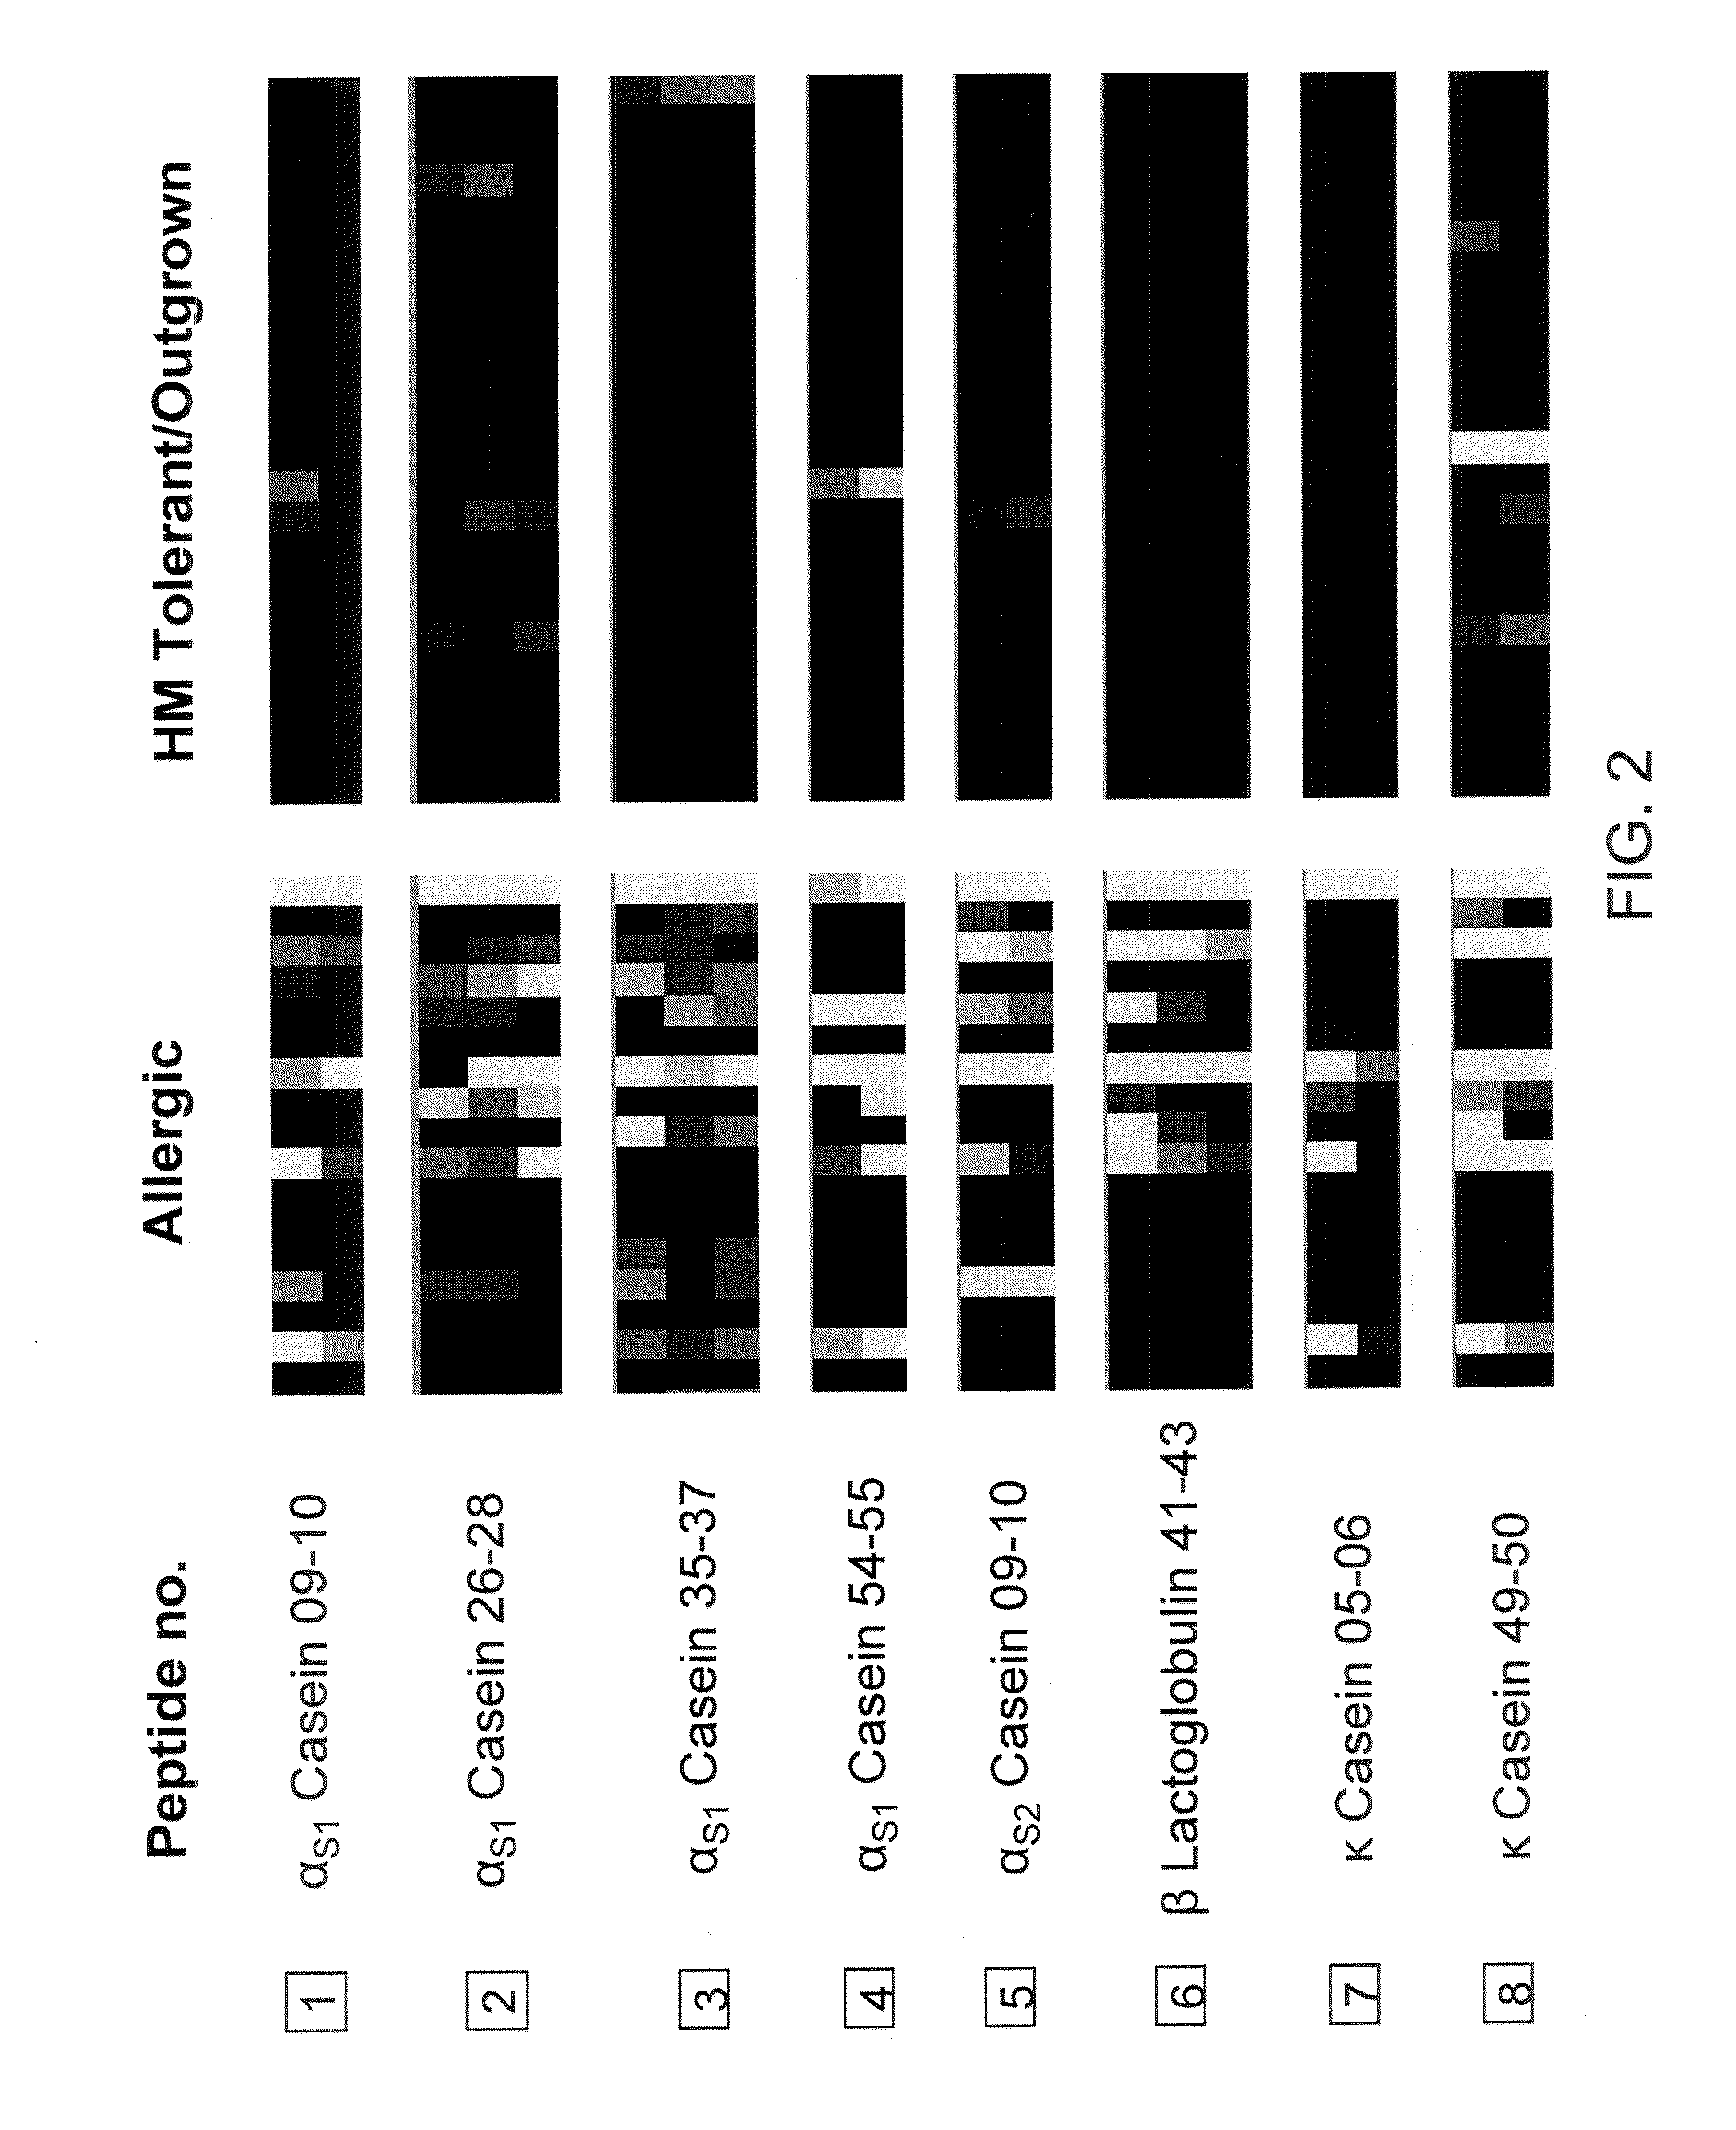 Methods For Characterizing Antibody Binding Affinity And Epitope Diversity in Food Allergy